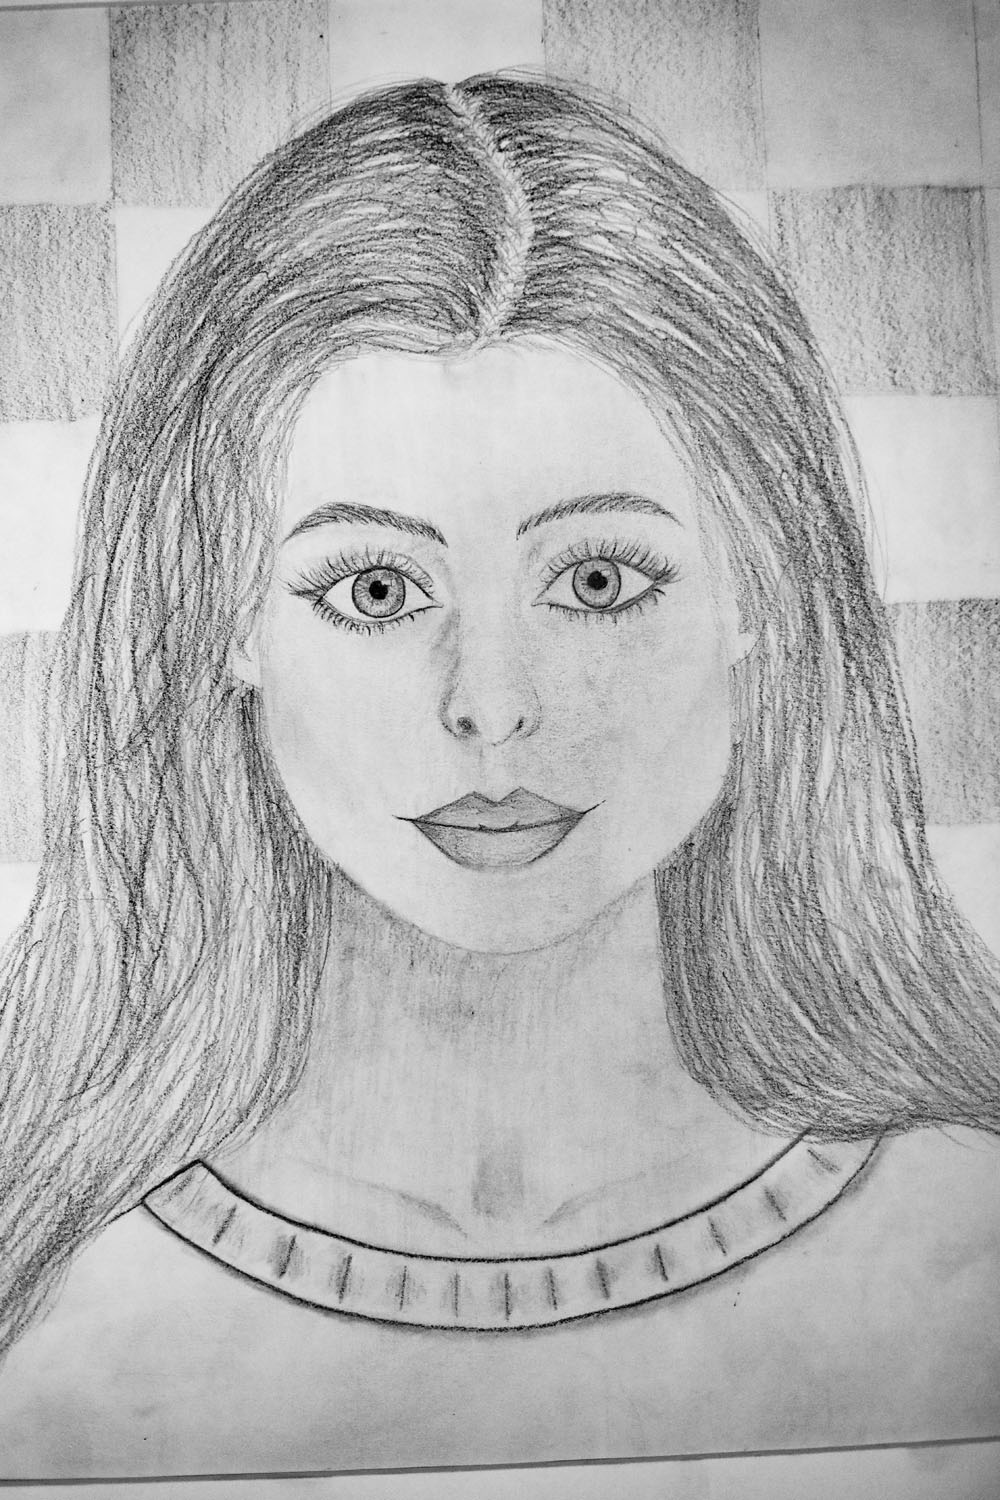 Pencil drawing of a girl with big eyes